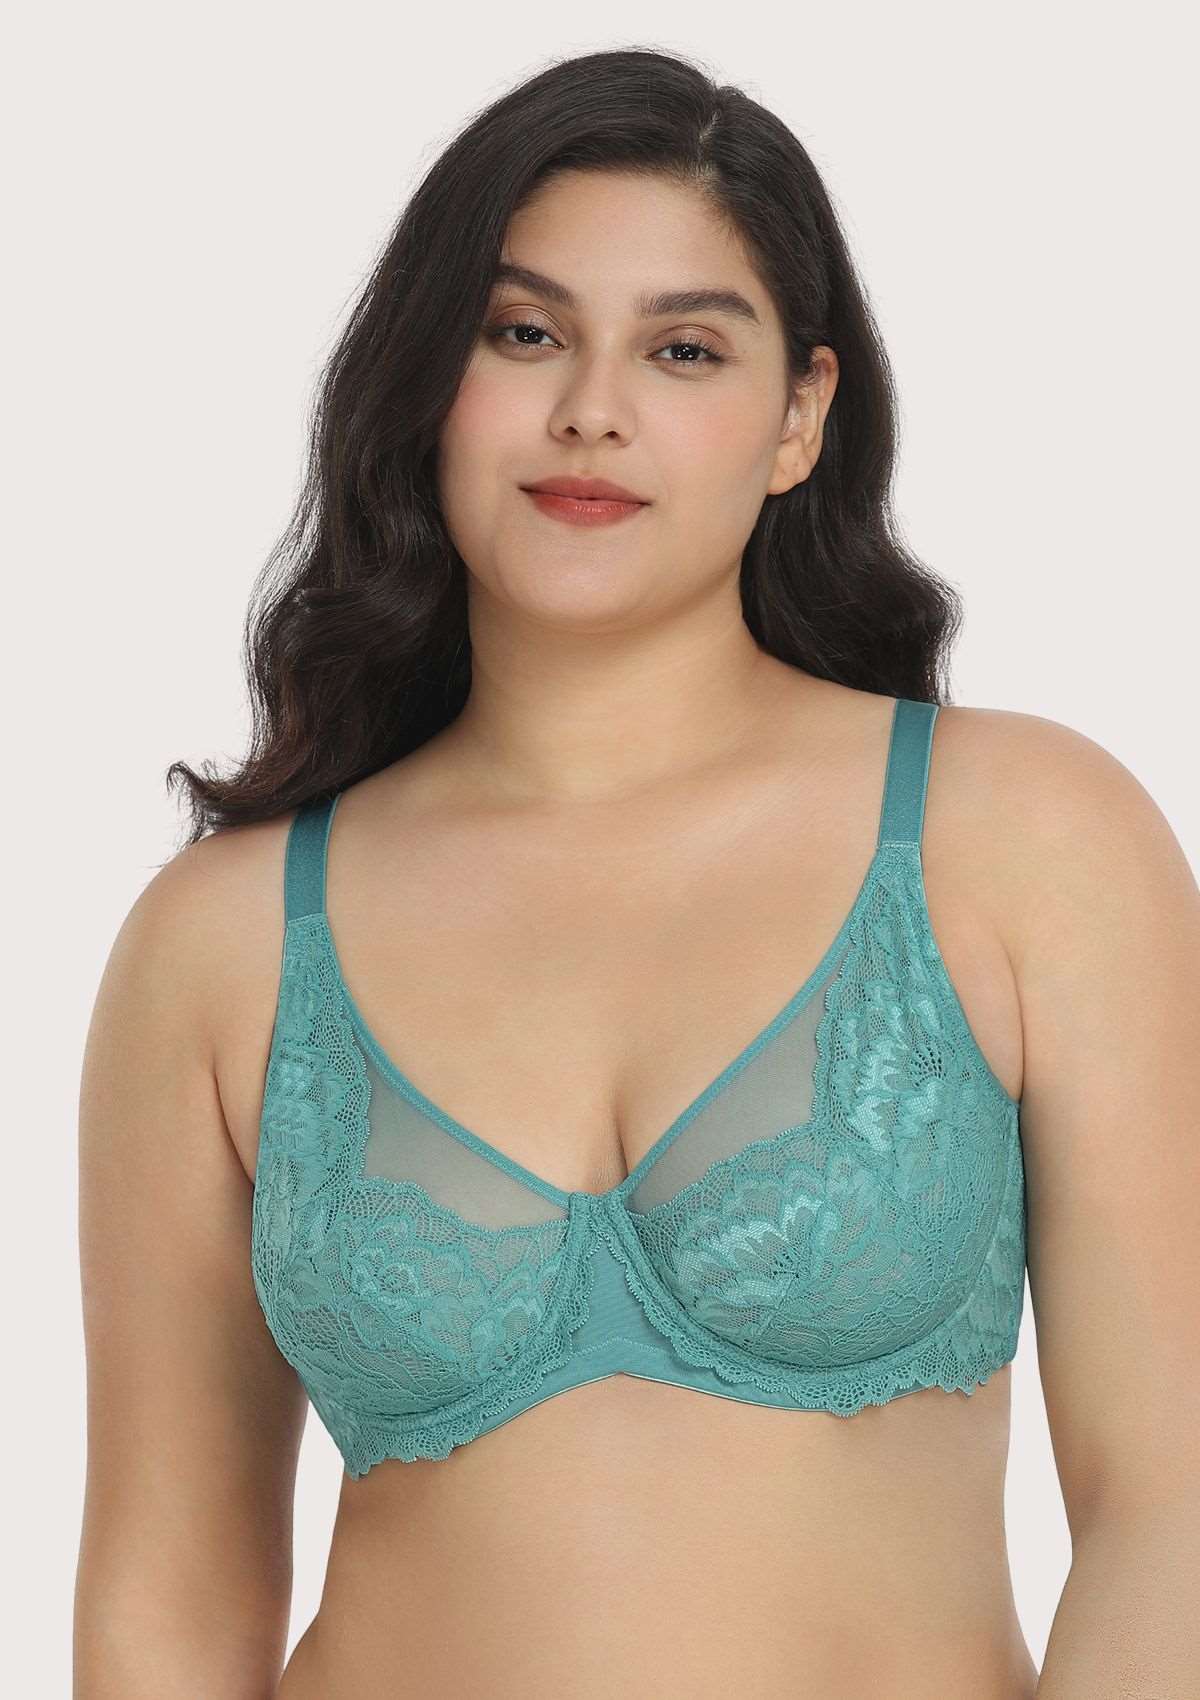 HSIA Paeonia Lace Full Coverage Underwire Non-Padded Uplifting Bra - Teal / 42 / C